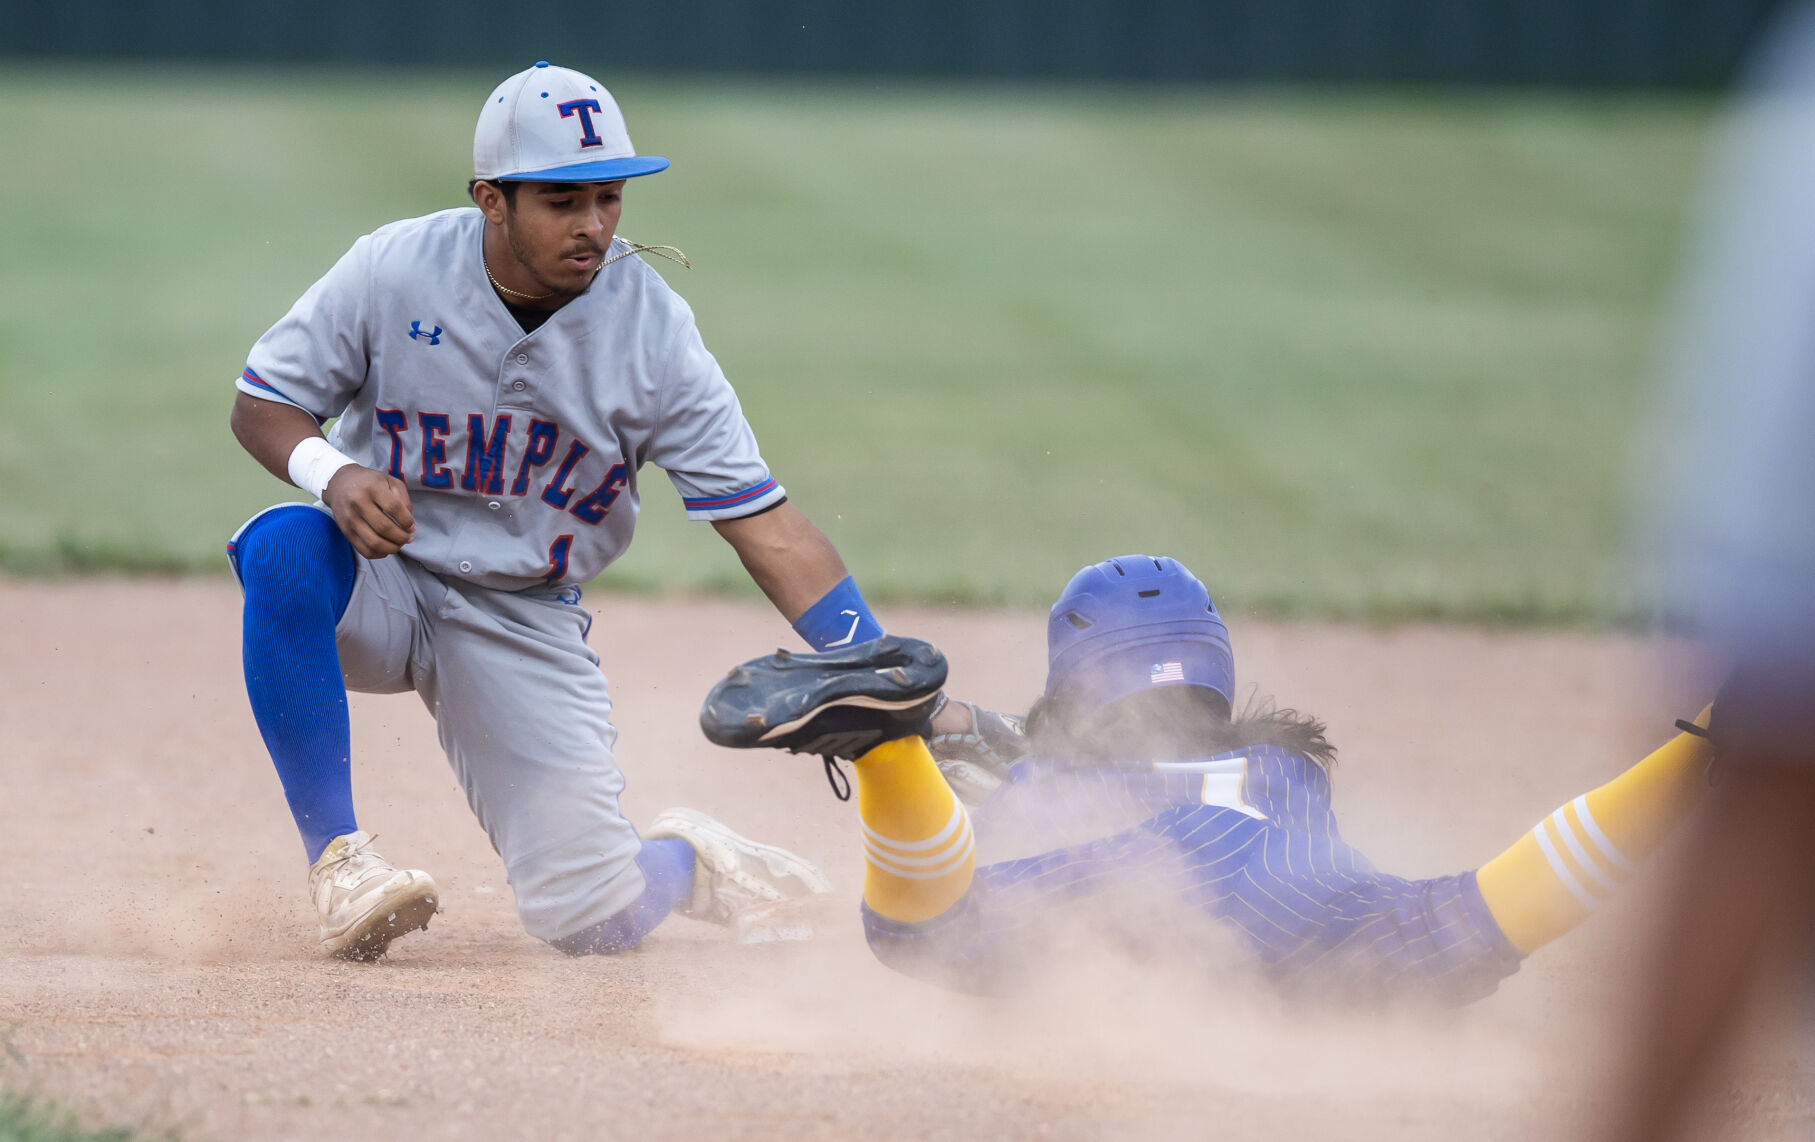 Temple secures 4th place in District 12-6A baseball with back-to-back wins over Copperas Cove